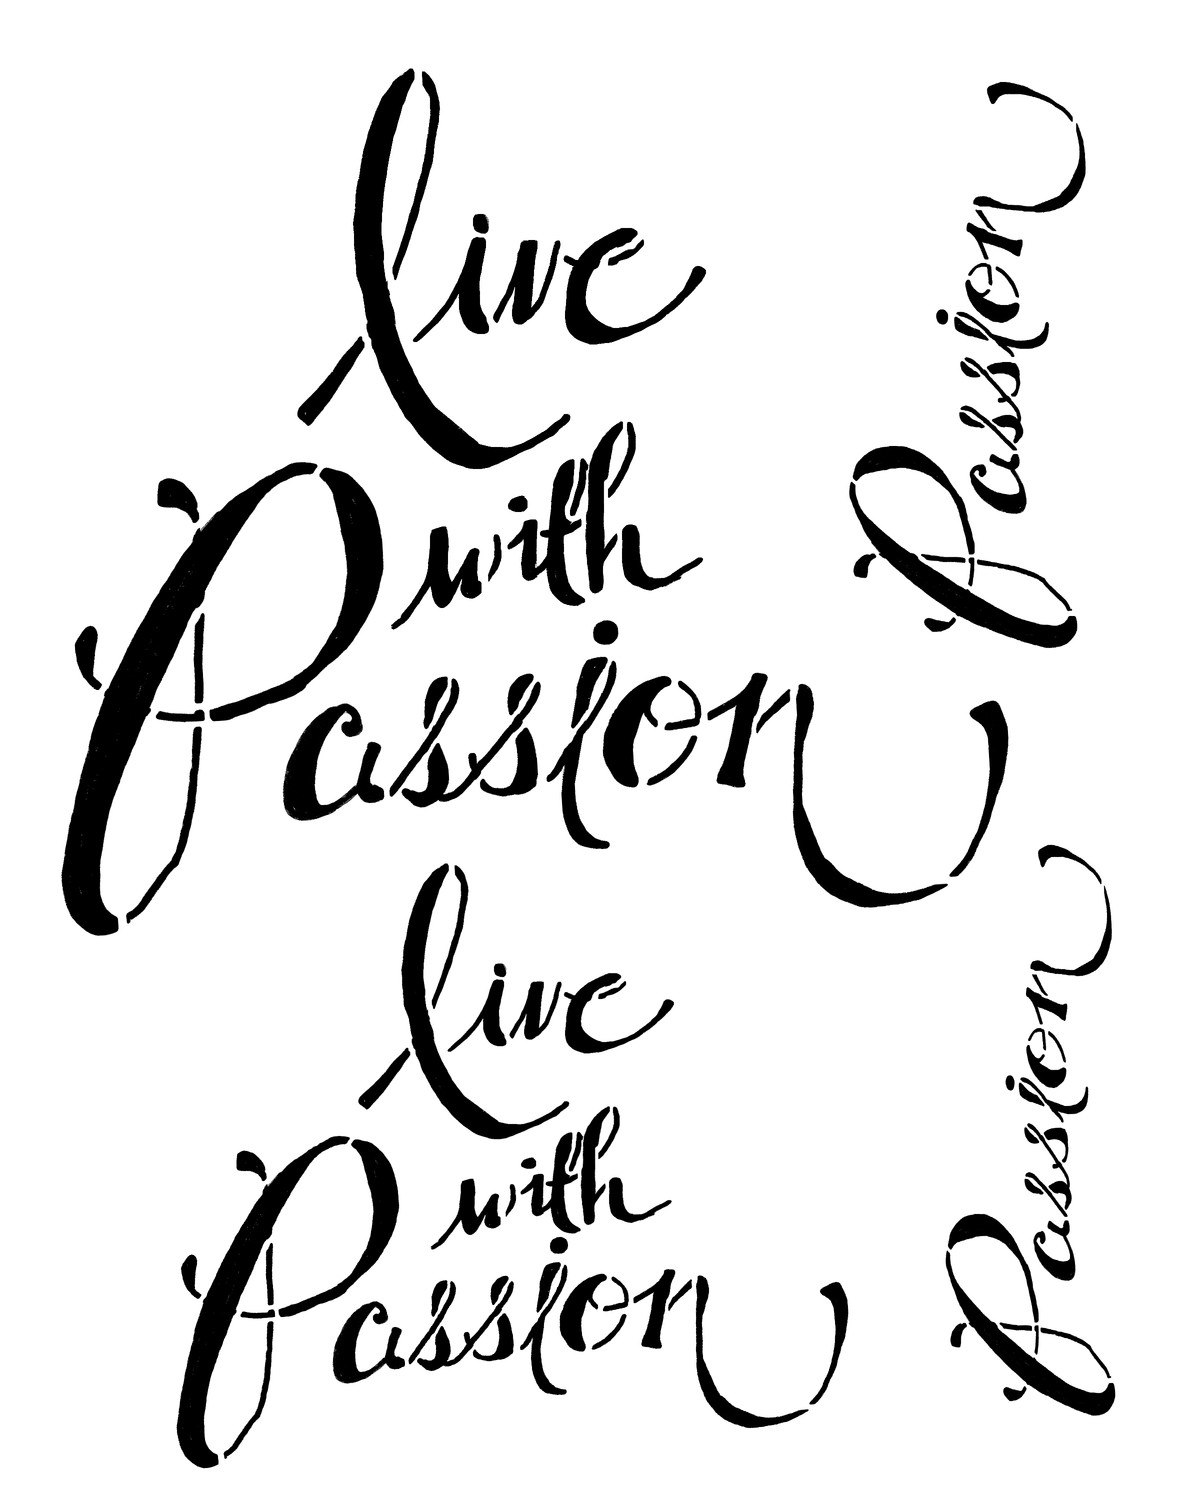 Live with Passion Stencil 8x10